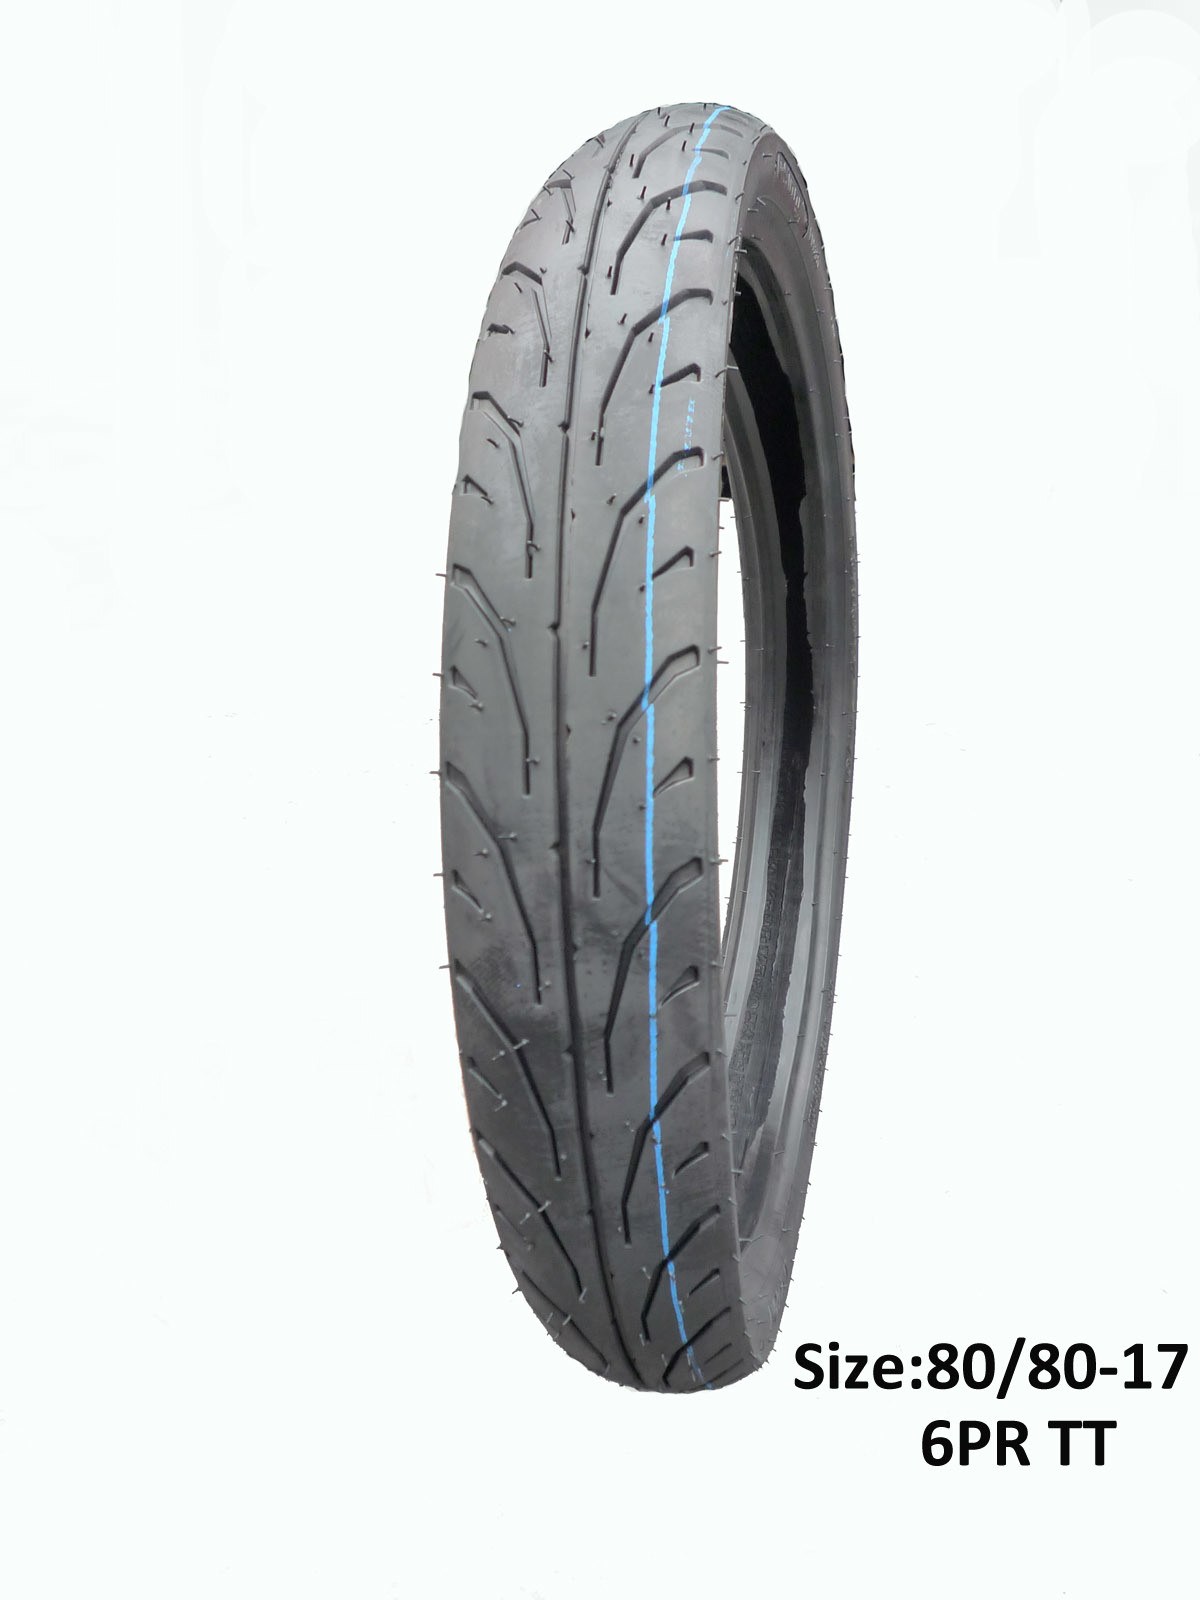 Low Price High Speed 80/80-17 Motorcycle Tires